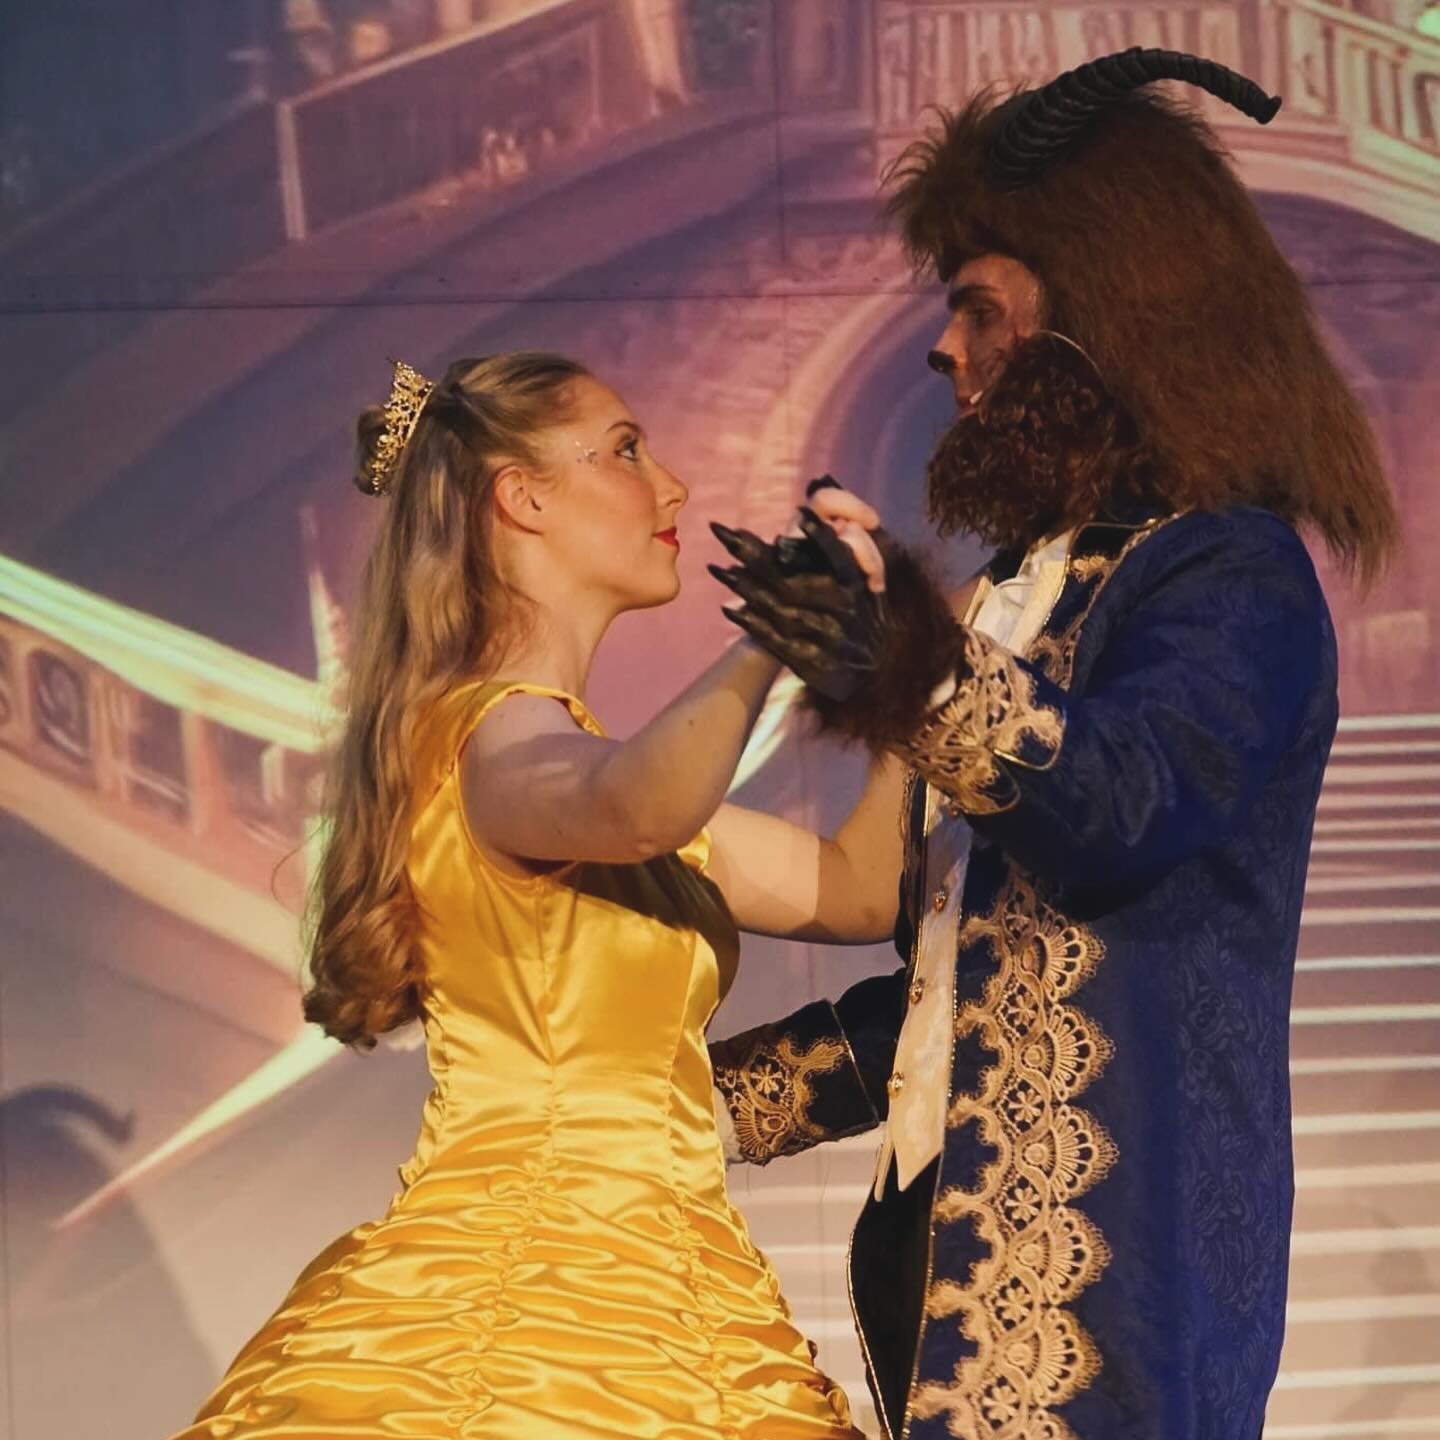 Beauty and the Beast had a great run with a full house for all performances! Our students were outstanding, from the front of the stage to the back! Thank you to everyone who made this classic tale come alive!